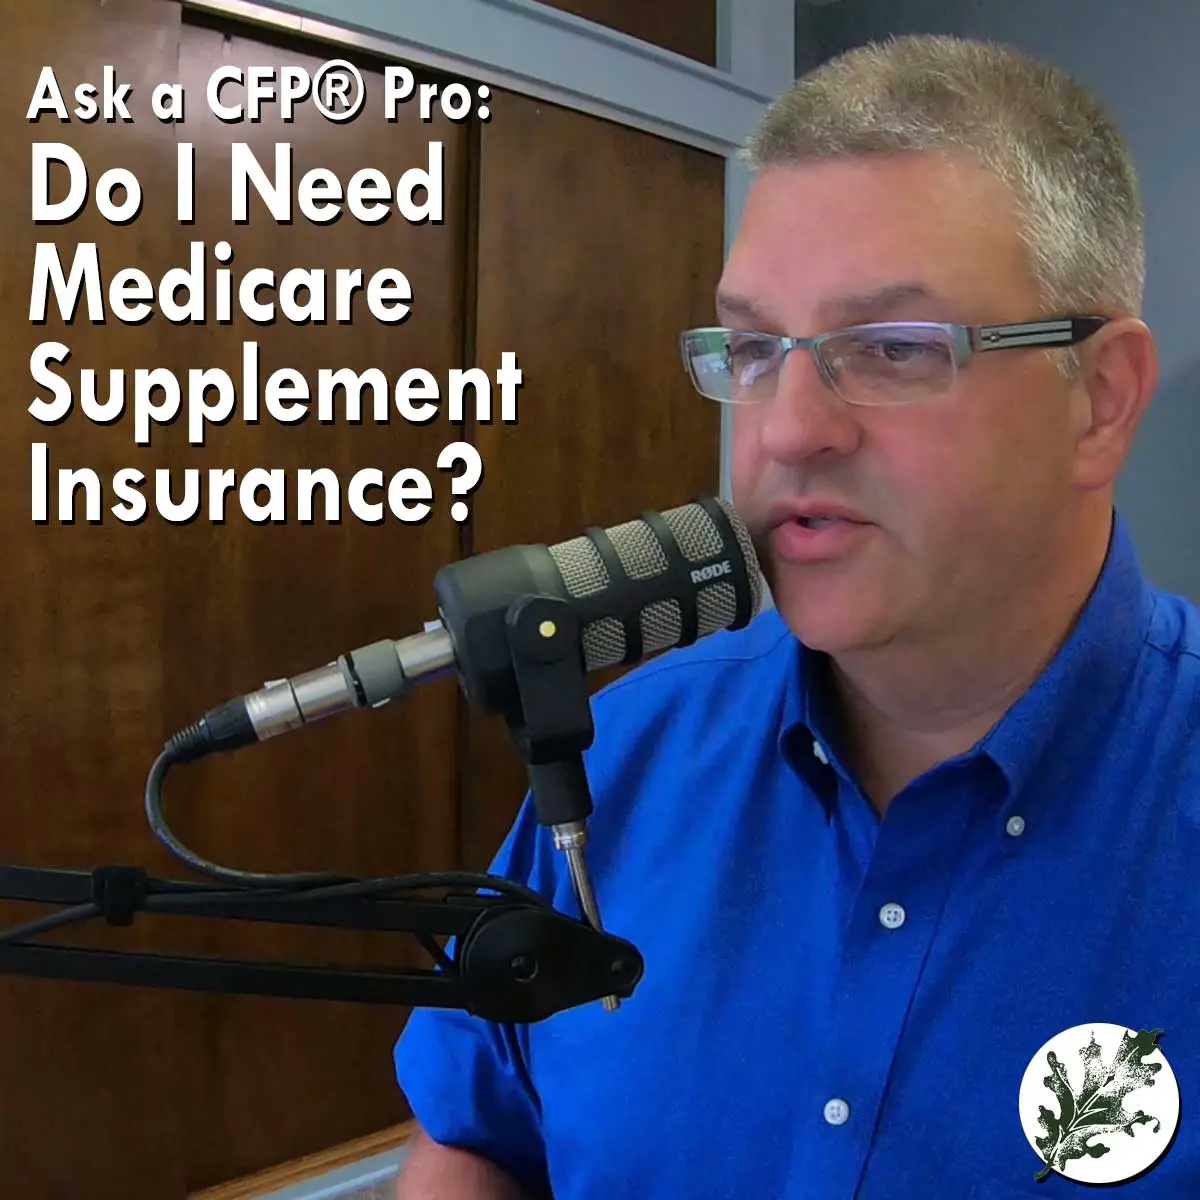 Ask a CFP® Pro: Do I Need Medicare Supplement Insurance?